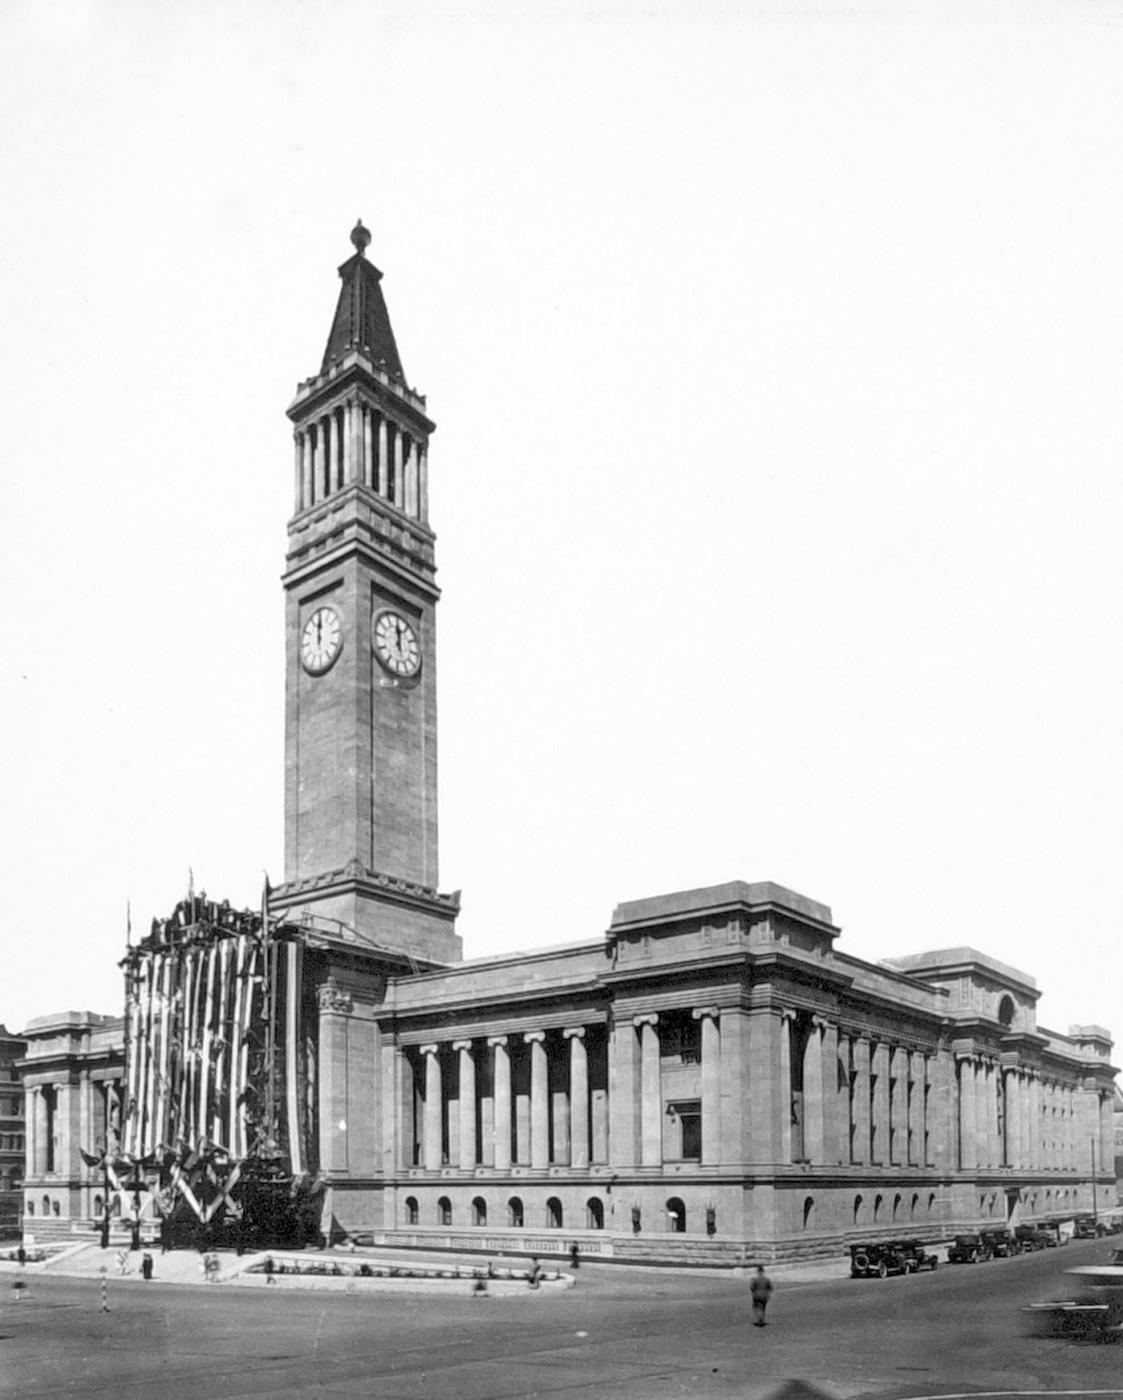 Brisbane City Hall, showing the full length of the tall clock tower